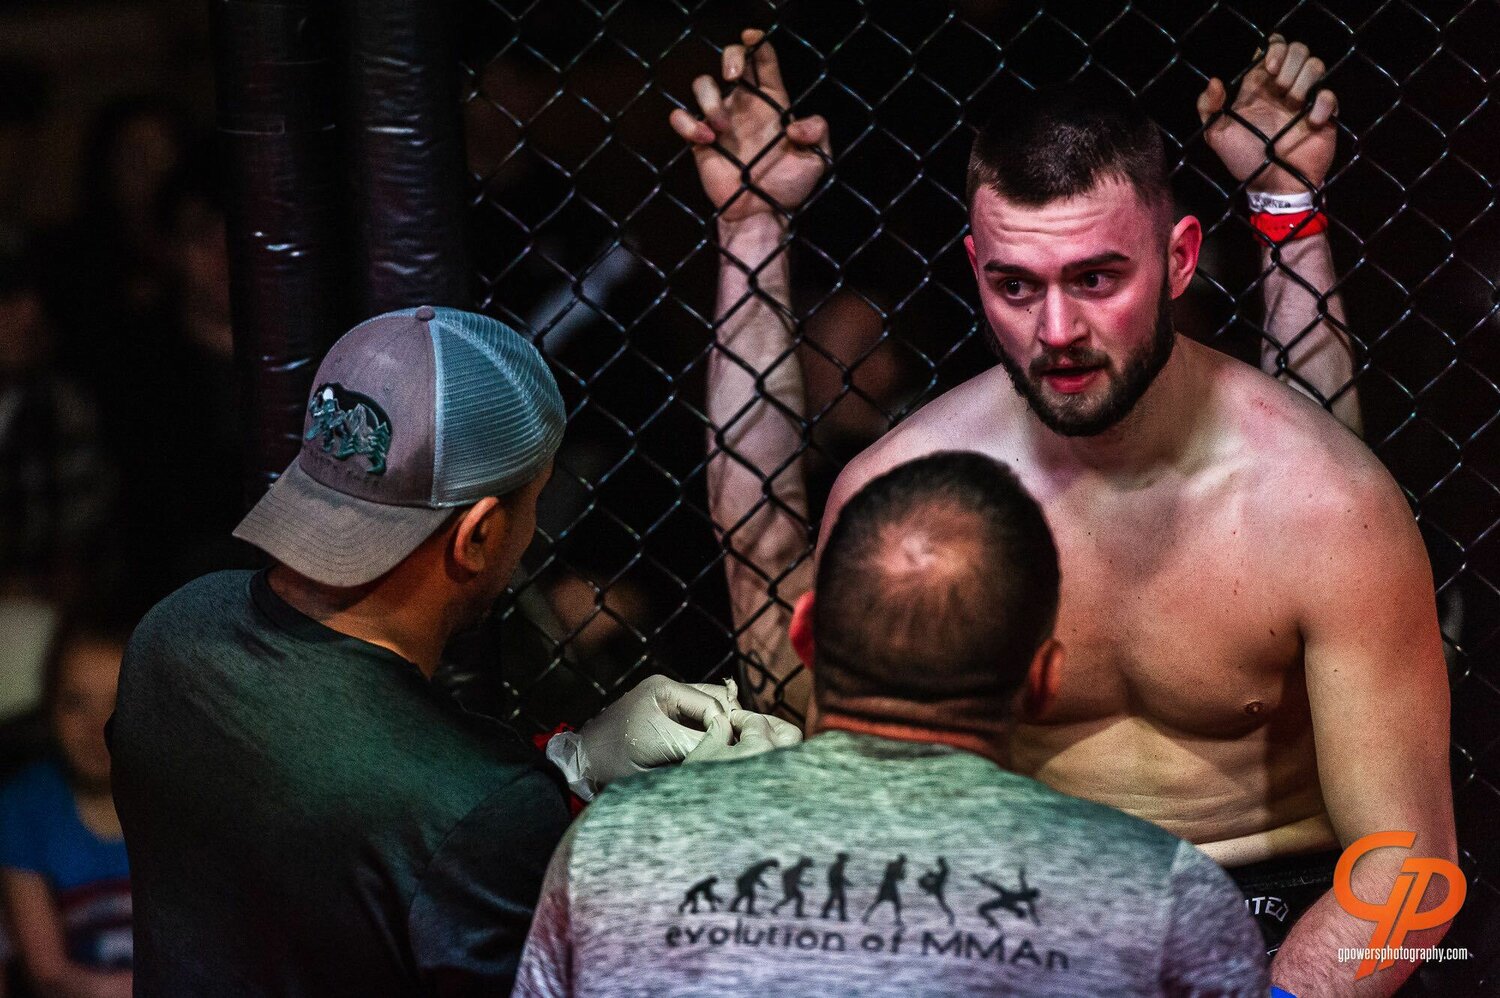 Tanner Rigdon is pictured during a recent MMA fight in this photo provided by Gavin Powers of G. Powers Photography.